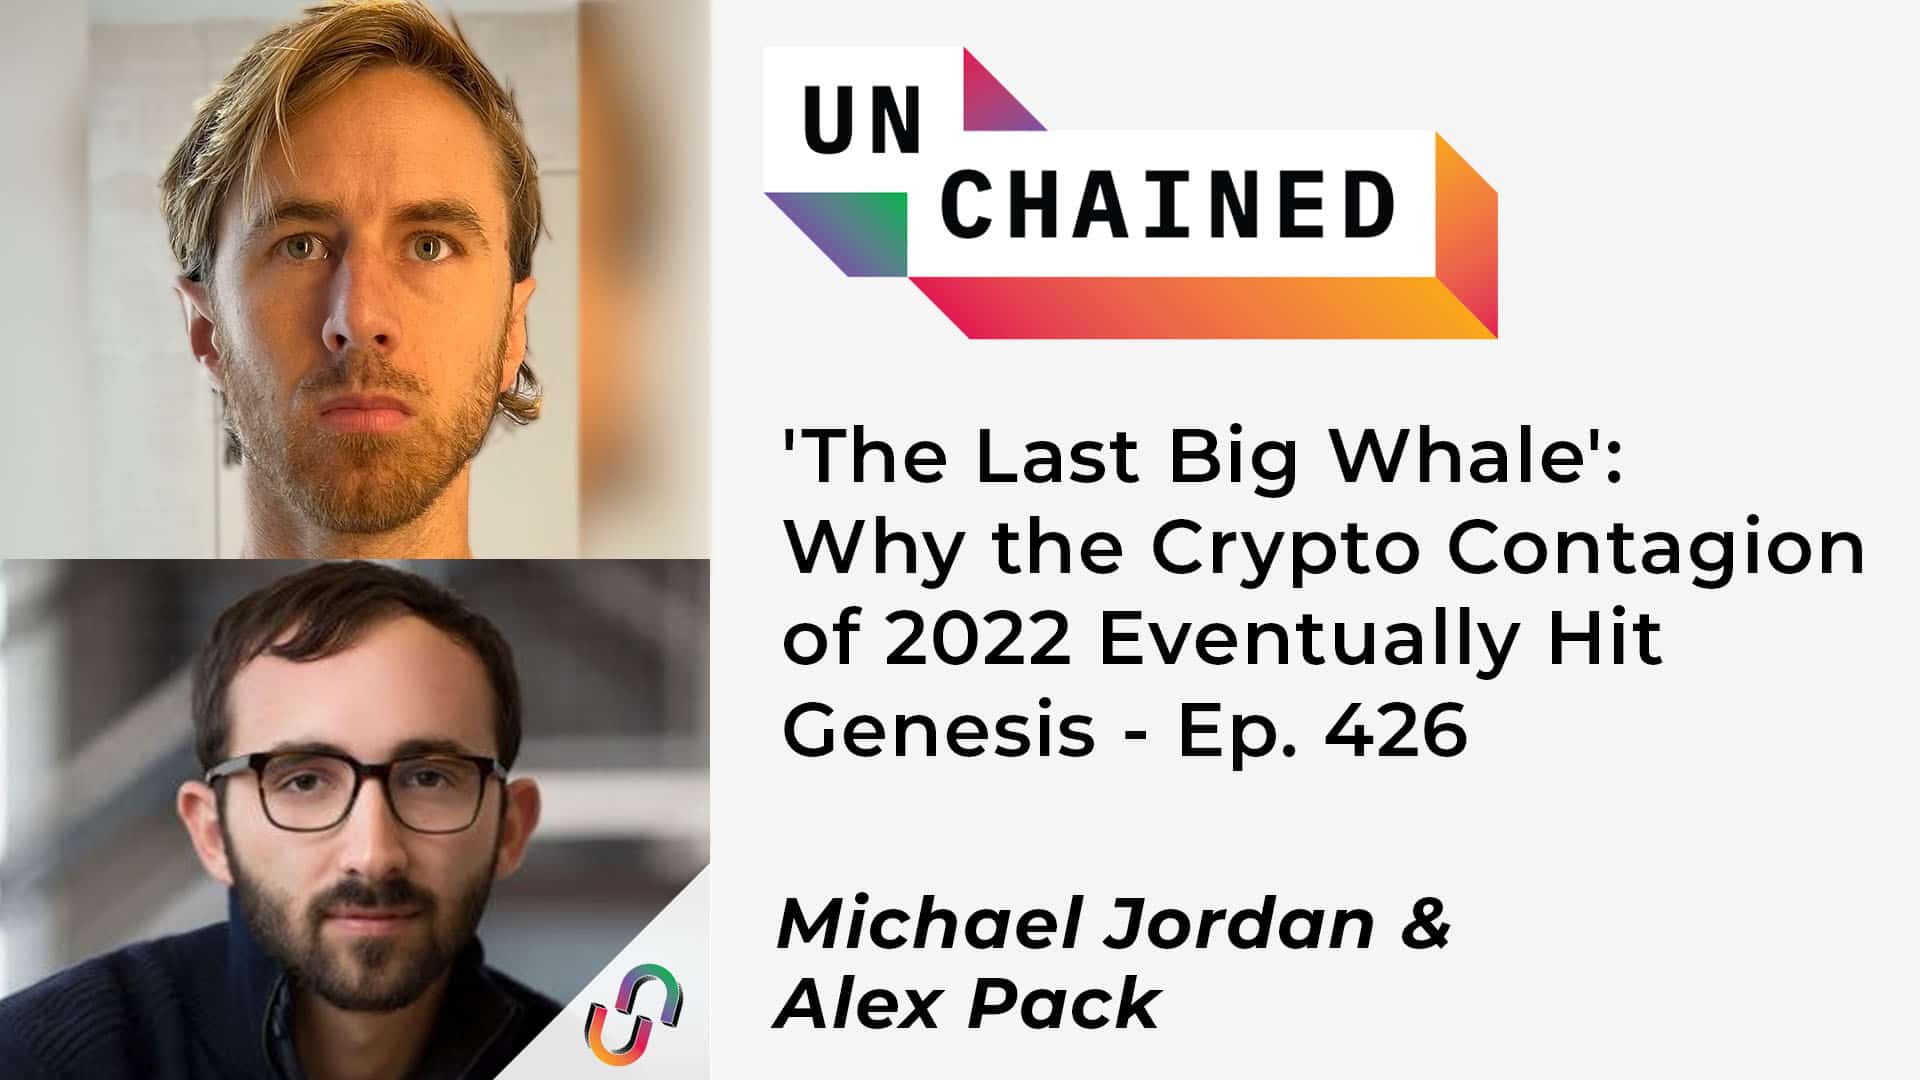 'The Last Big Whale': Why the Crypto Contagion of 2022 Eventually Hit Genesis - Ep. 426